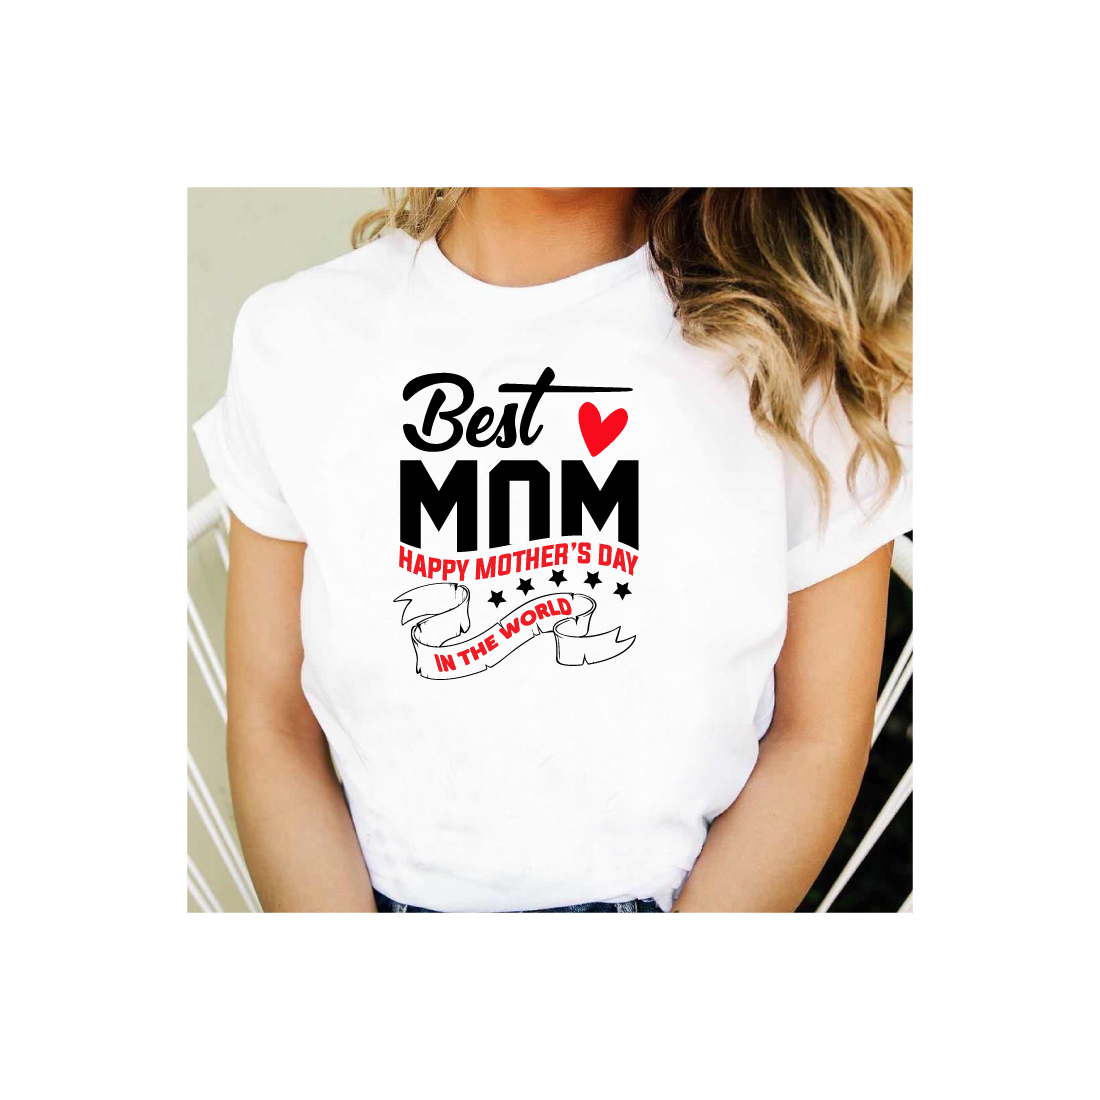 Woman wearing a t - shirt that says best mom.